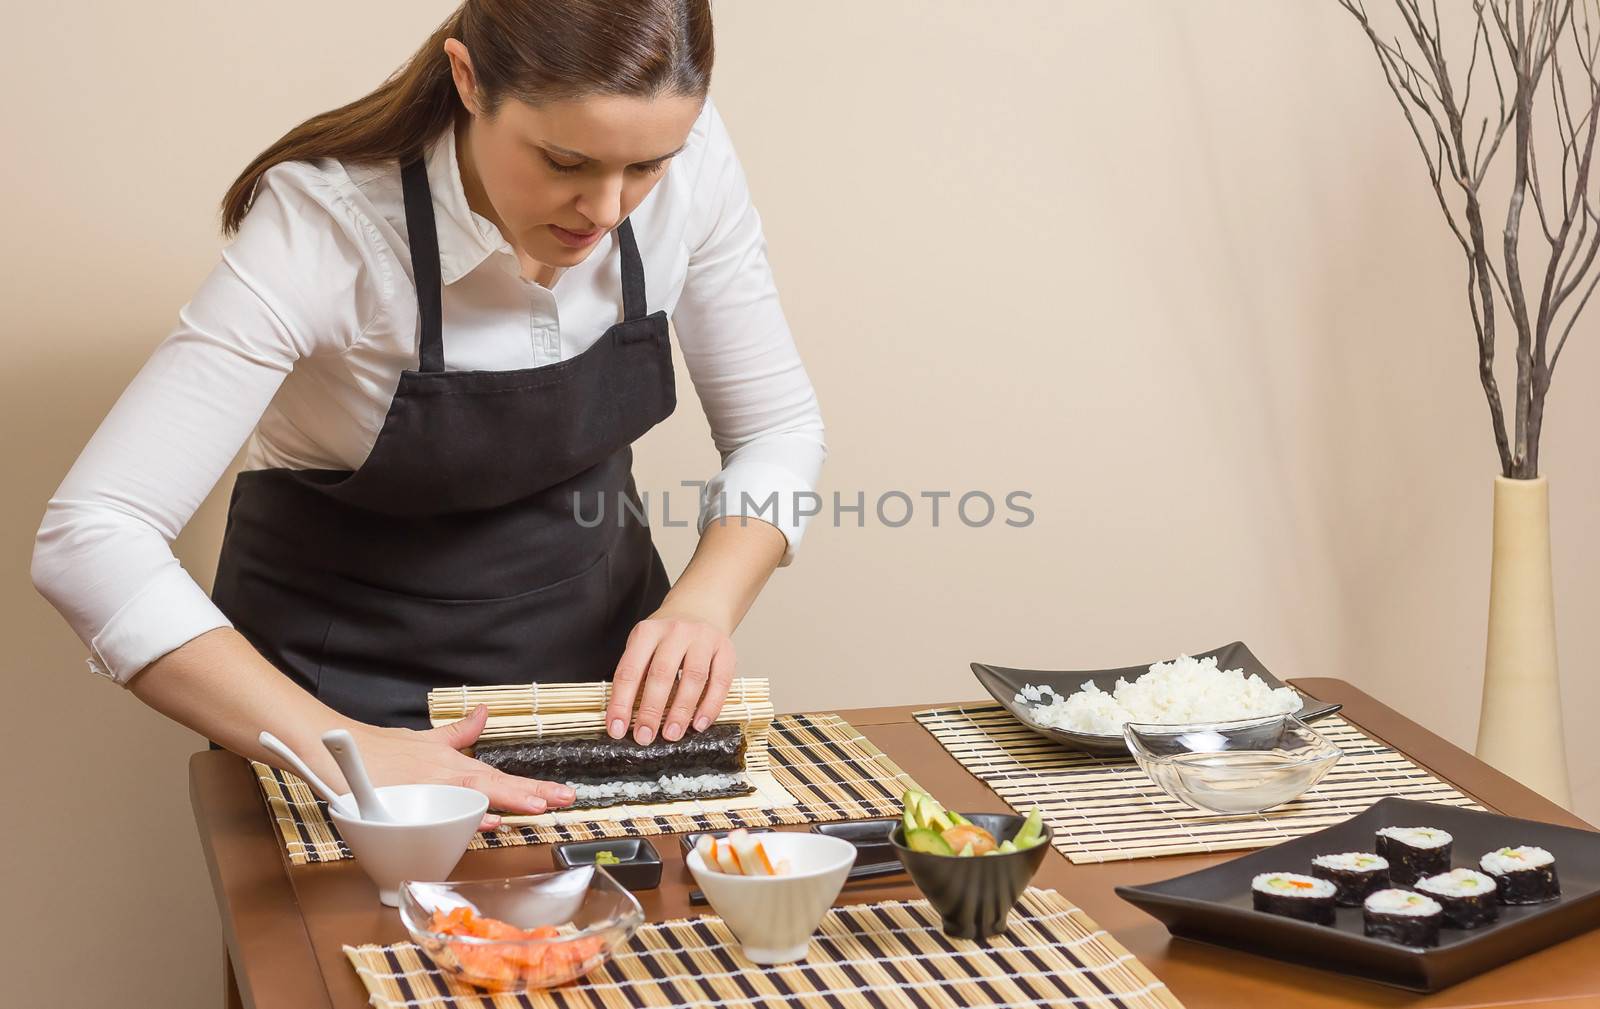 Portrait of woman chef rolling up a japanese sushi with rice, avocado and shrimps on nori seaweed sheet